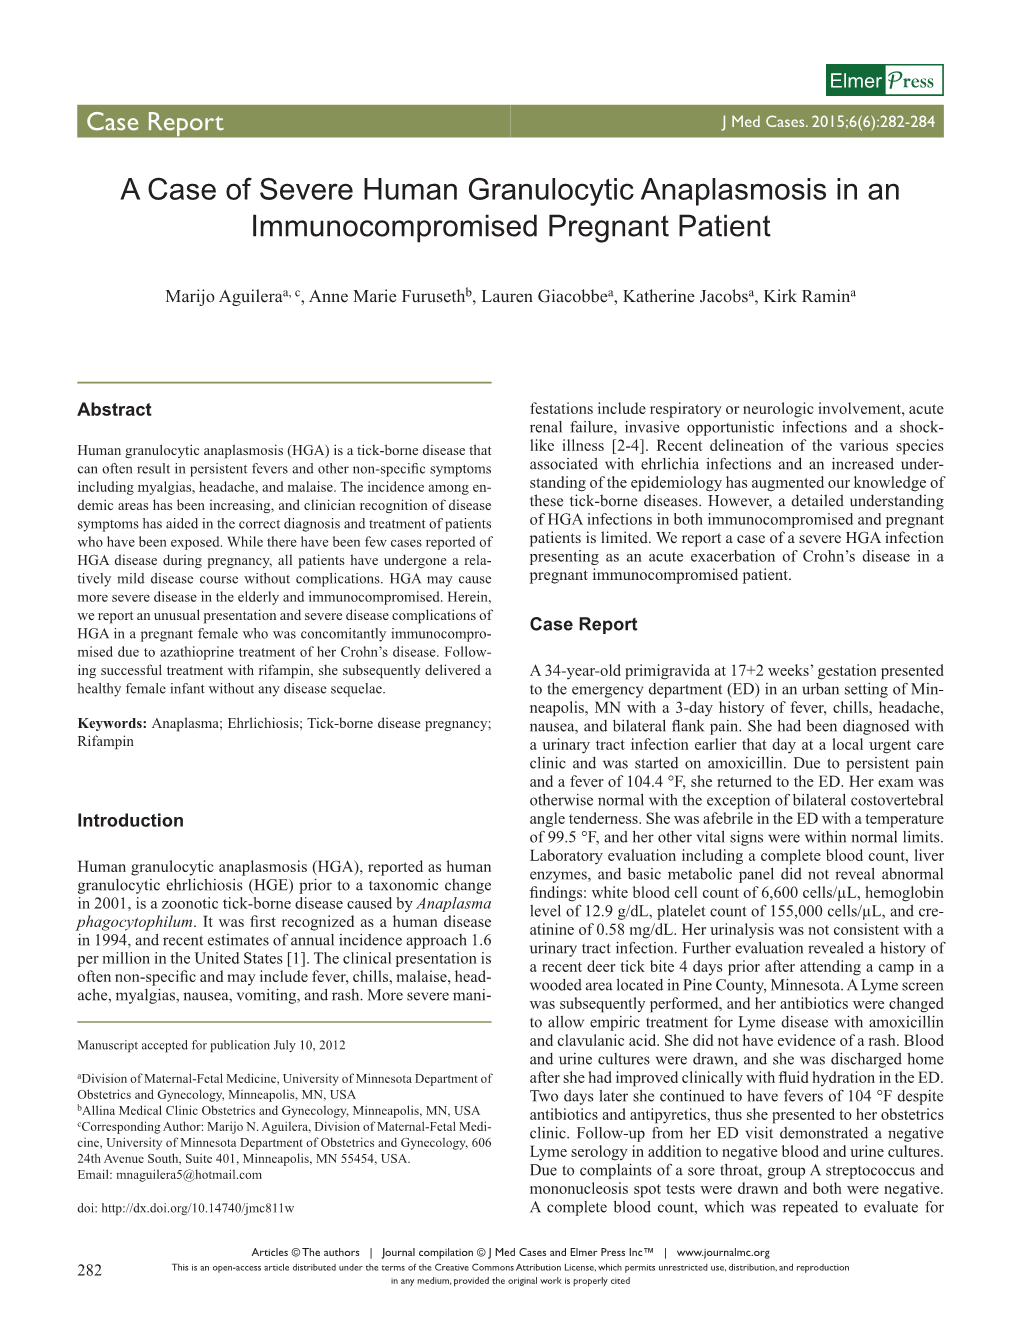 A Case of Severe Human Granulocytic Anaplasmosis in an Immunocompromised Pregnant Patient